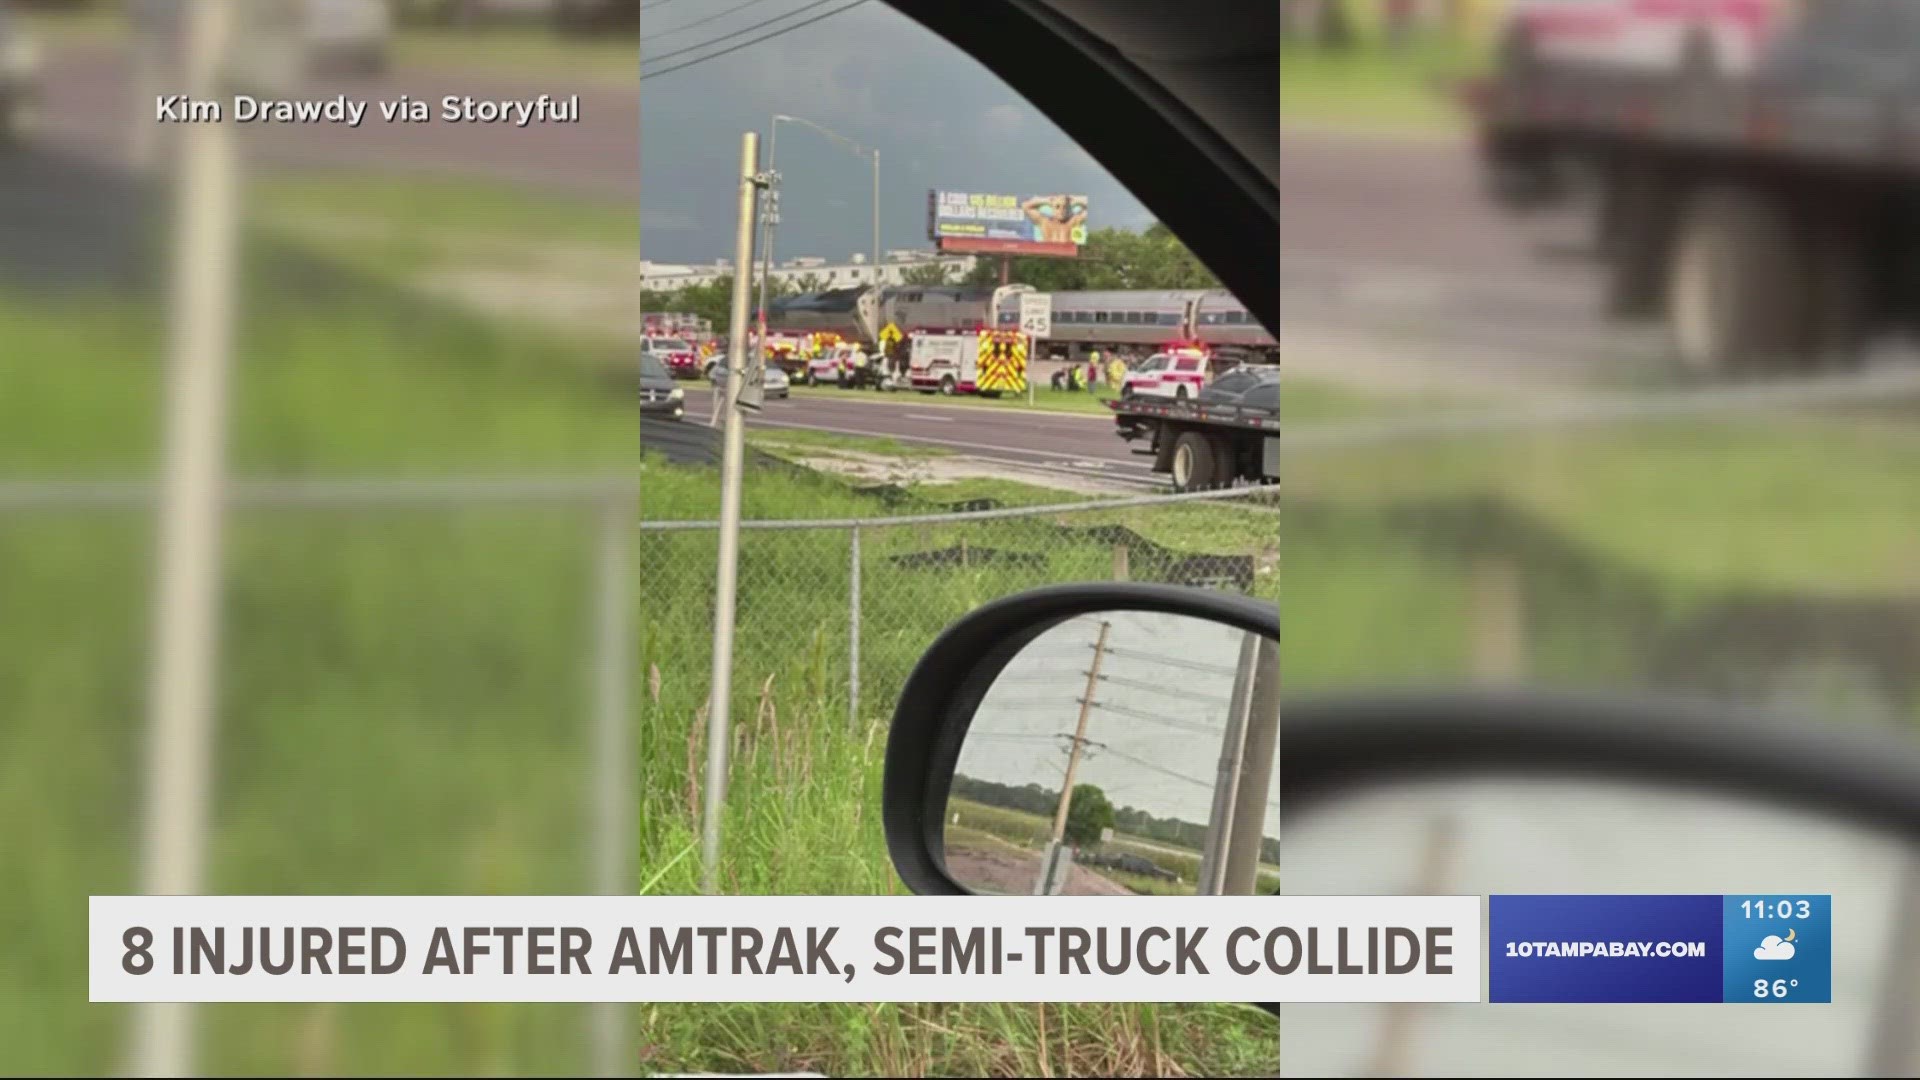 A semi-truck hauling seven vehicles became stuck on a train track right before the crash.